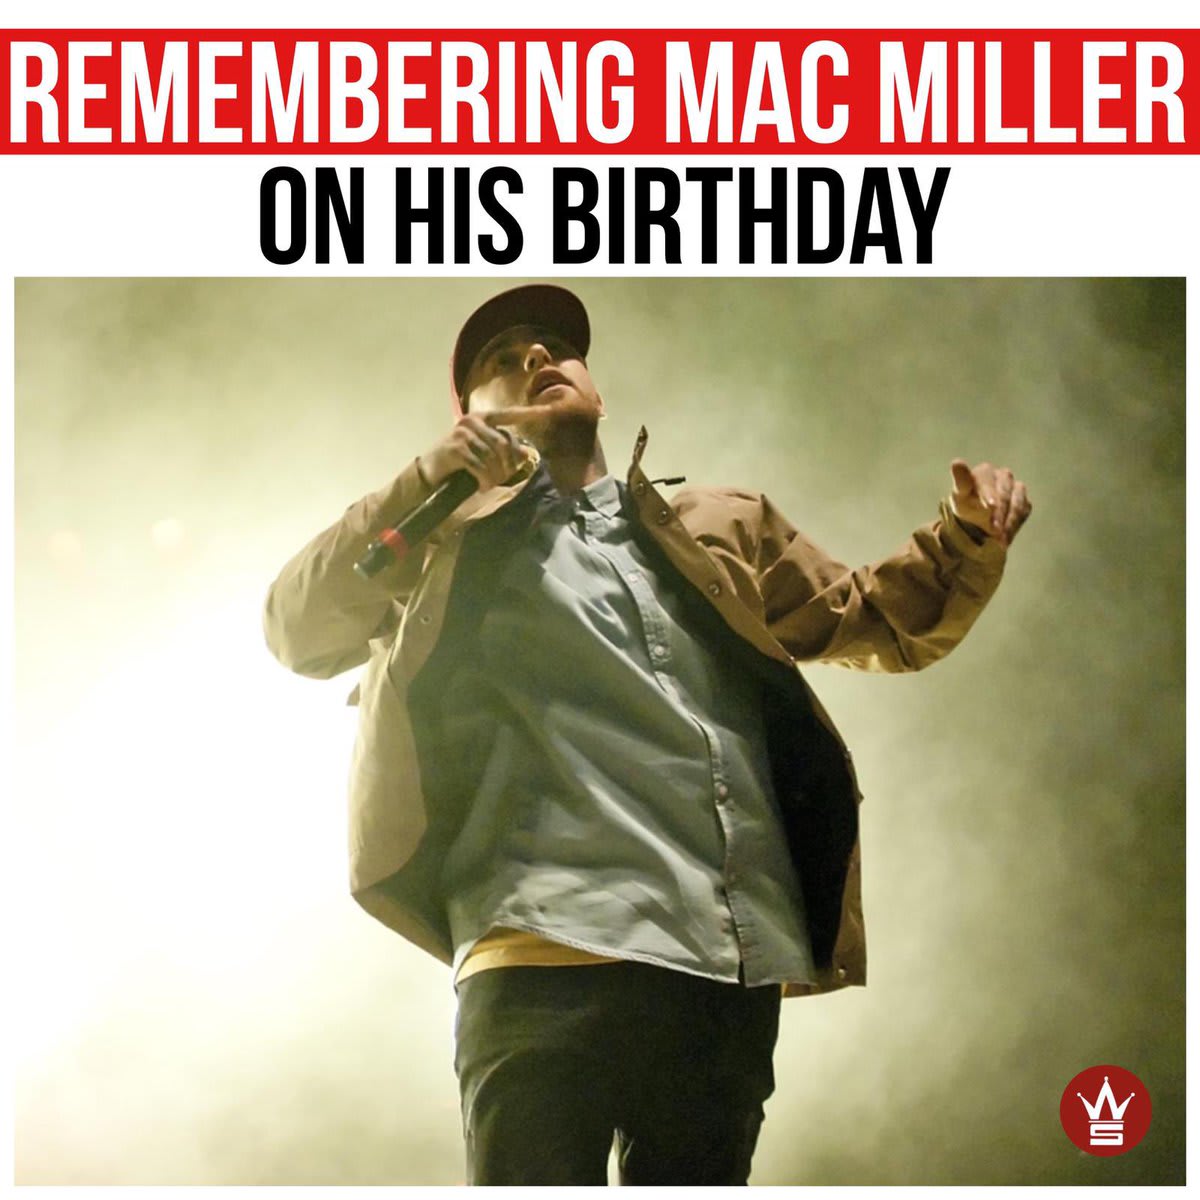 Today we remember the life of MacMiller on his birthday. Our thoughts and prayers continue to be with his family and friends. Comment your favorite song of his below!